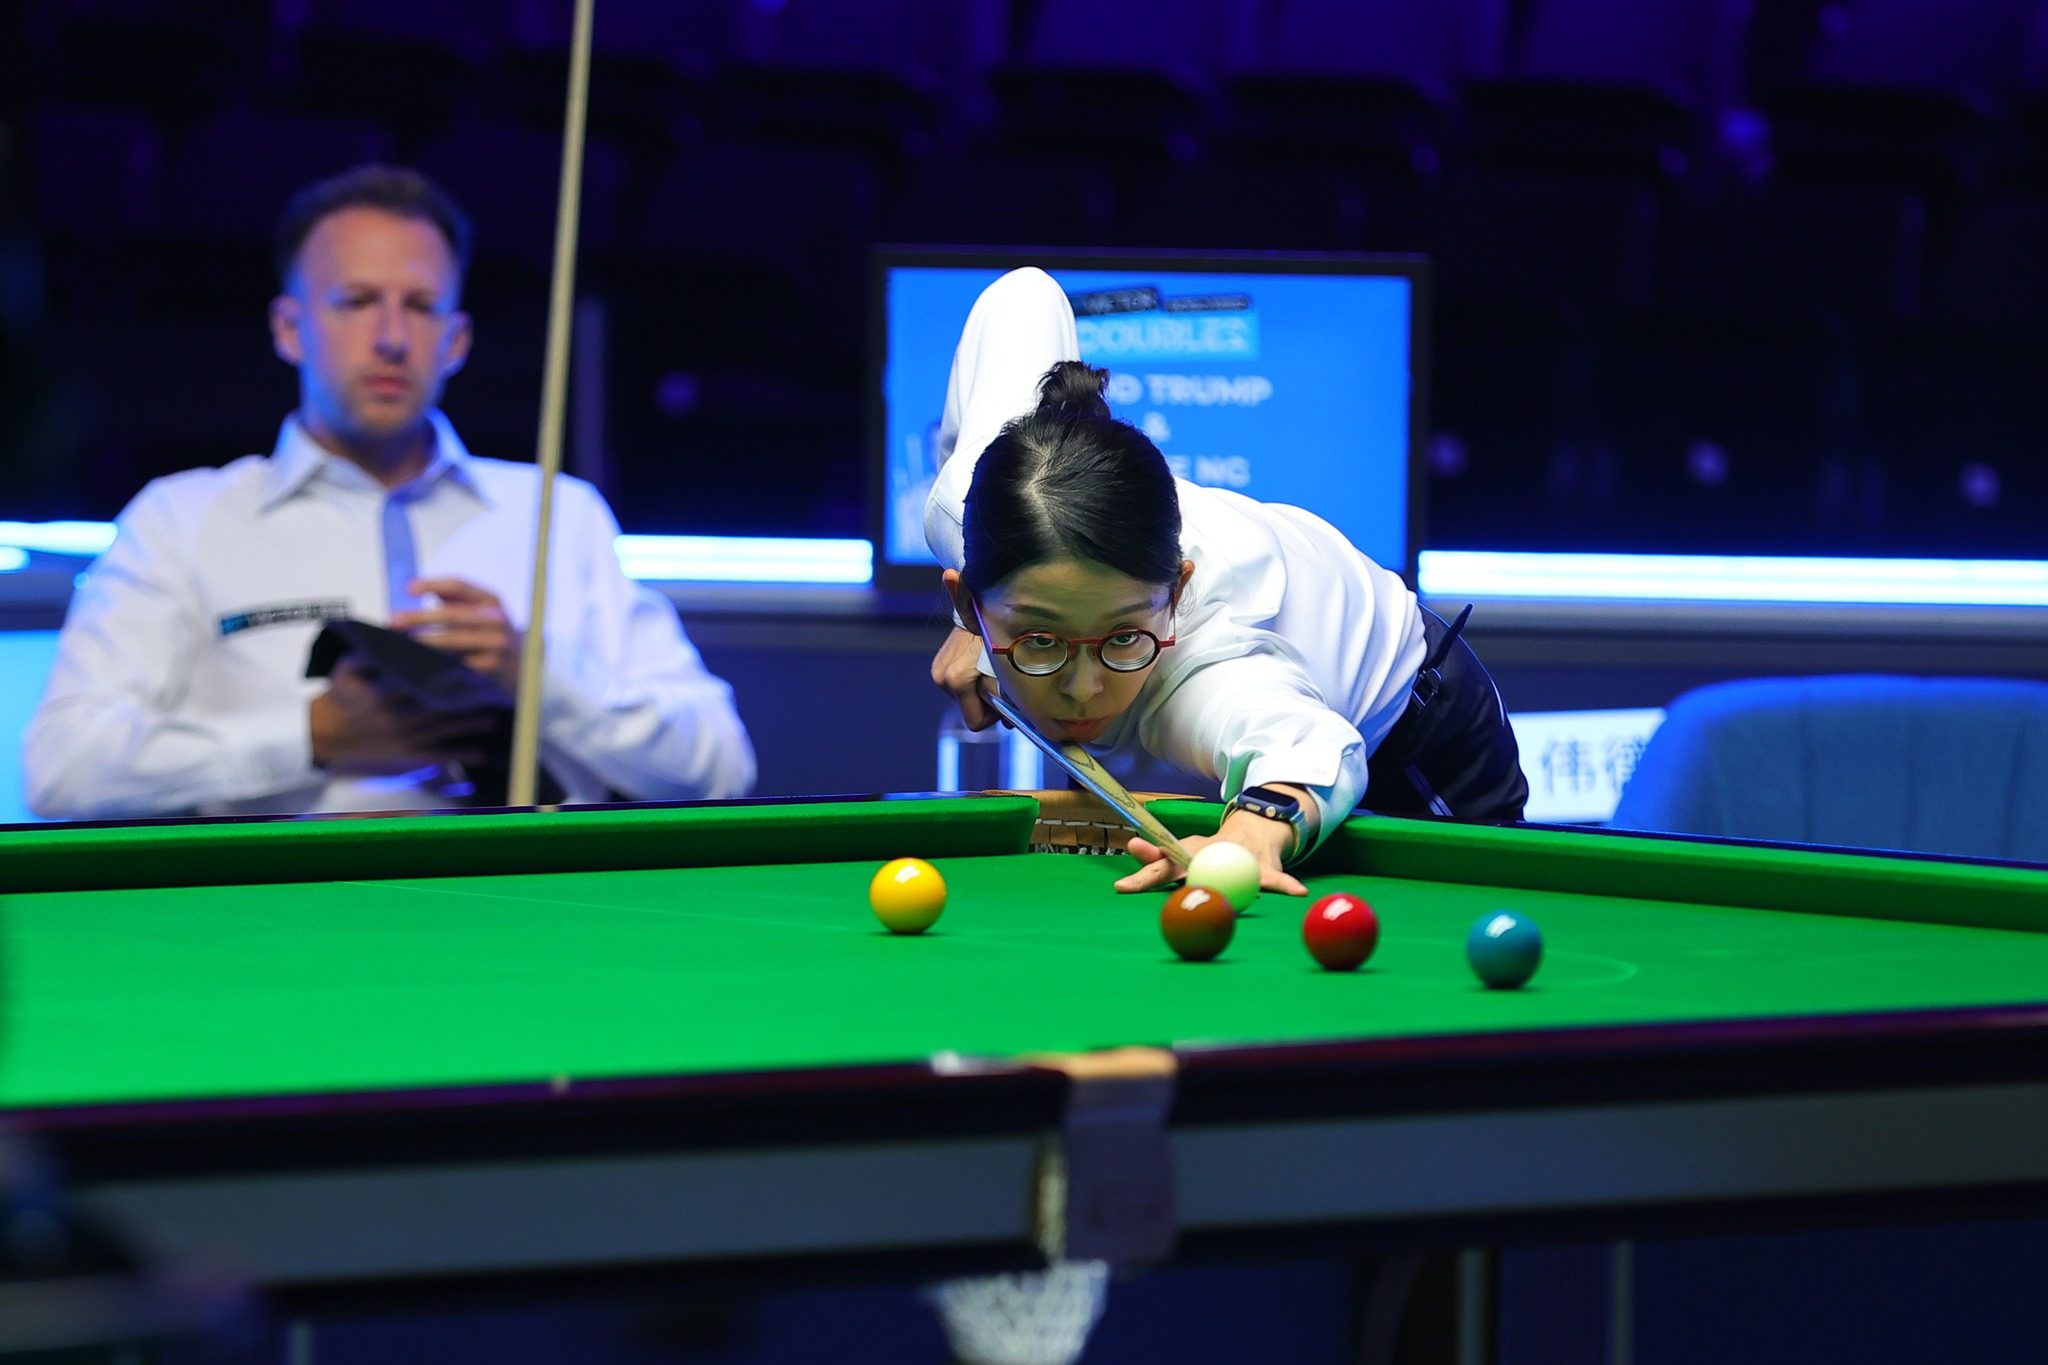 In the opening match of the World Mixed Doubles, Ng On-yee and Judd Trump beat Ronnie O’Sullivan and Reanne Evans. Photos: World Snooker Tour